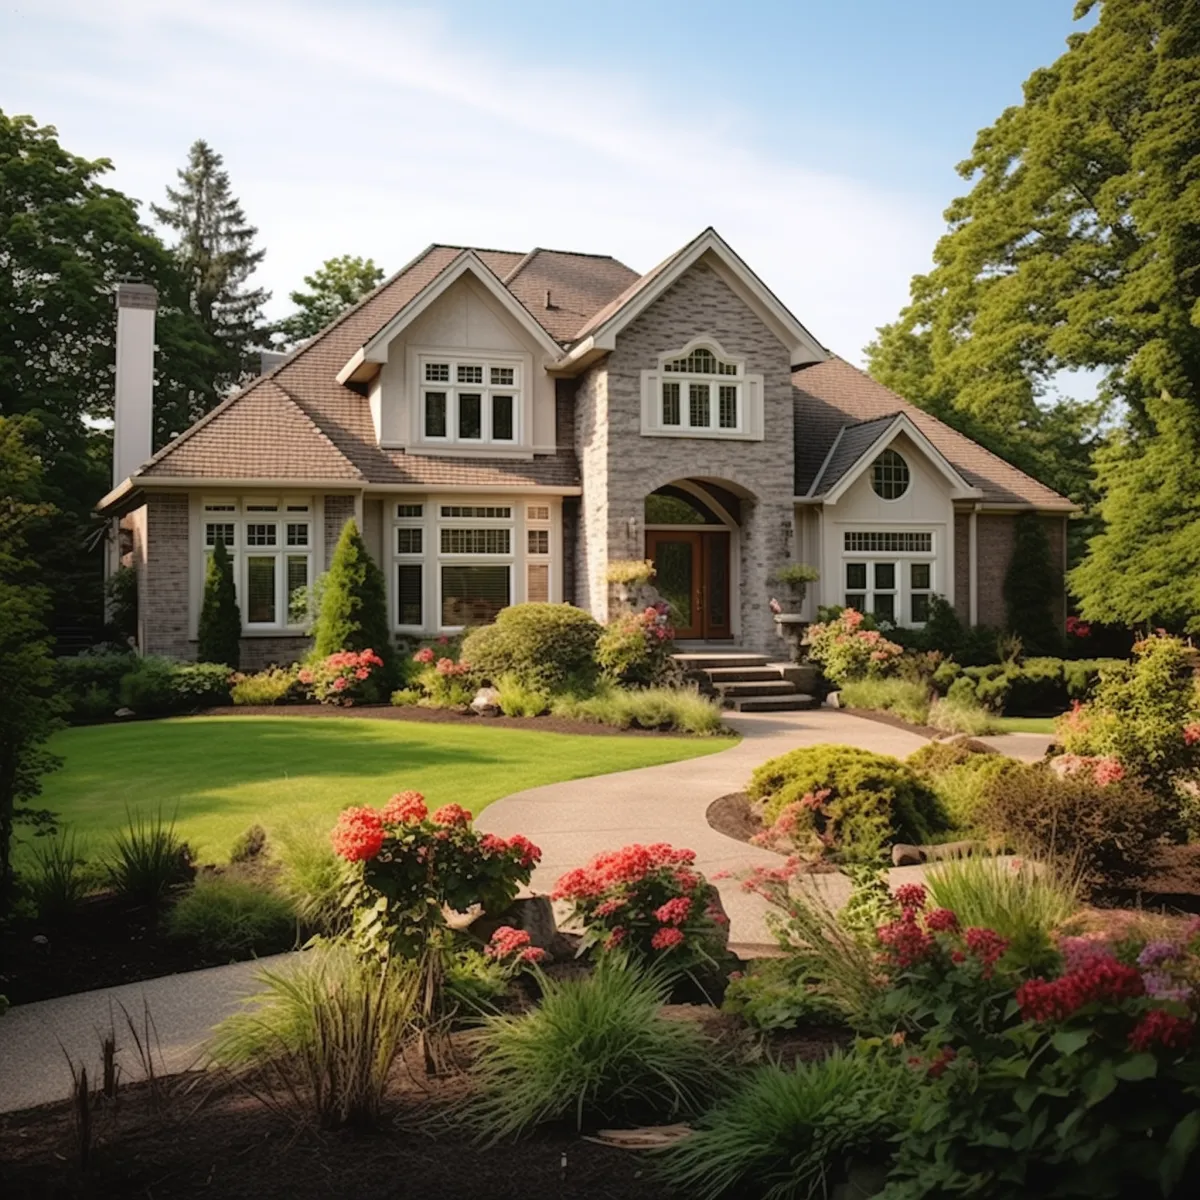 Image of home with landscaping